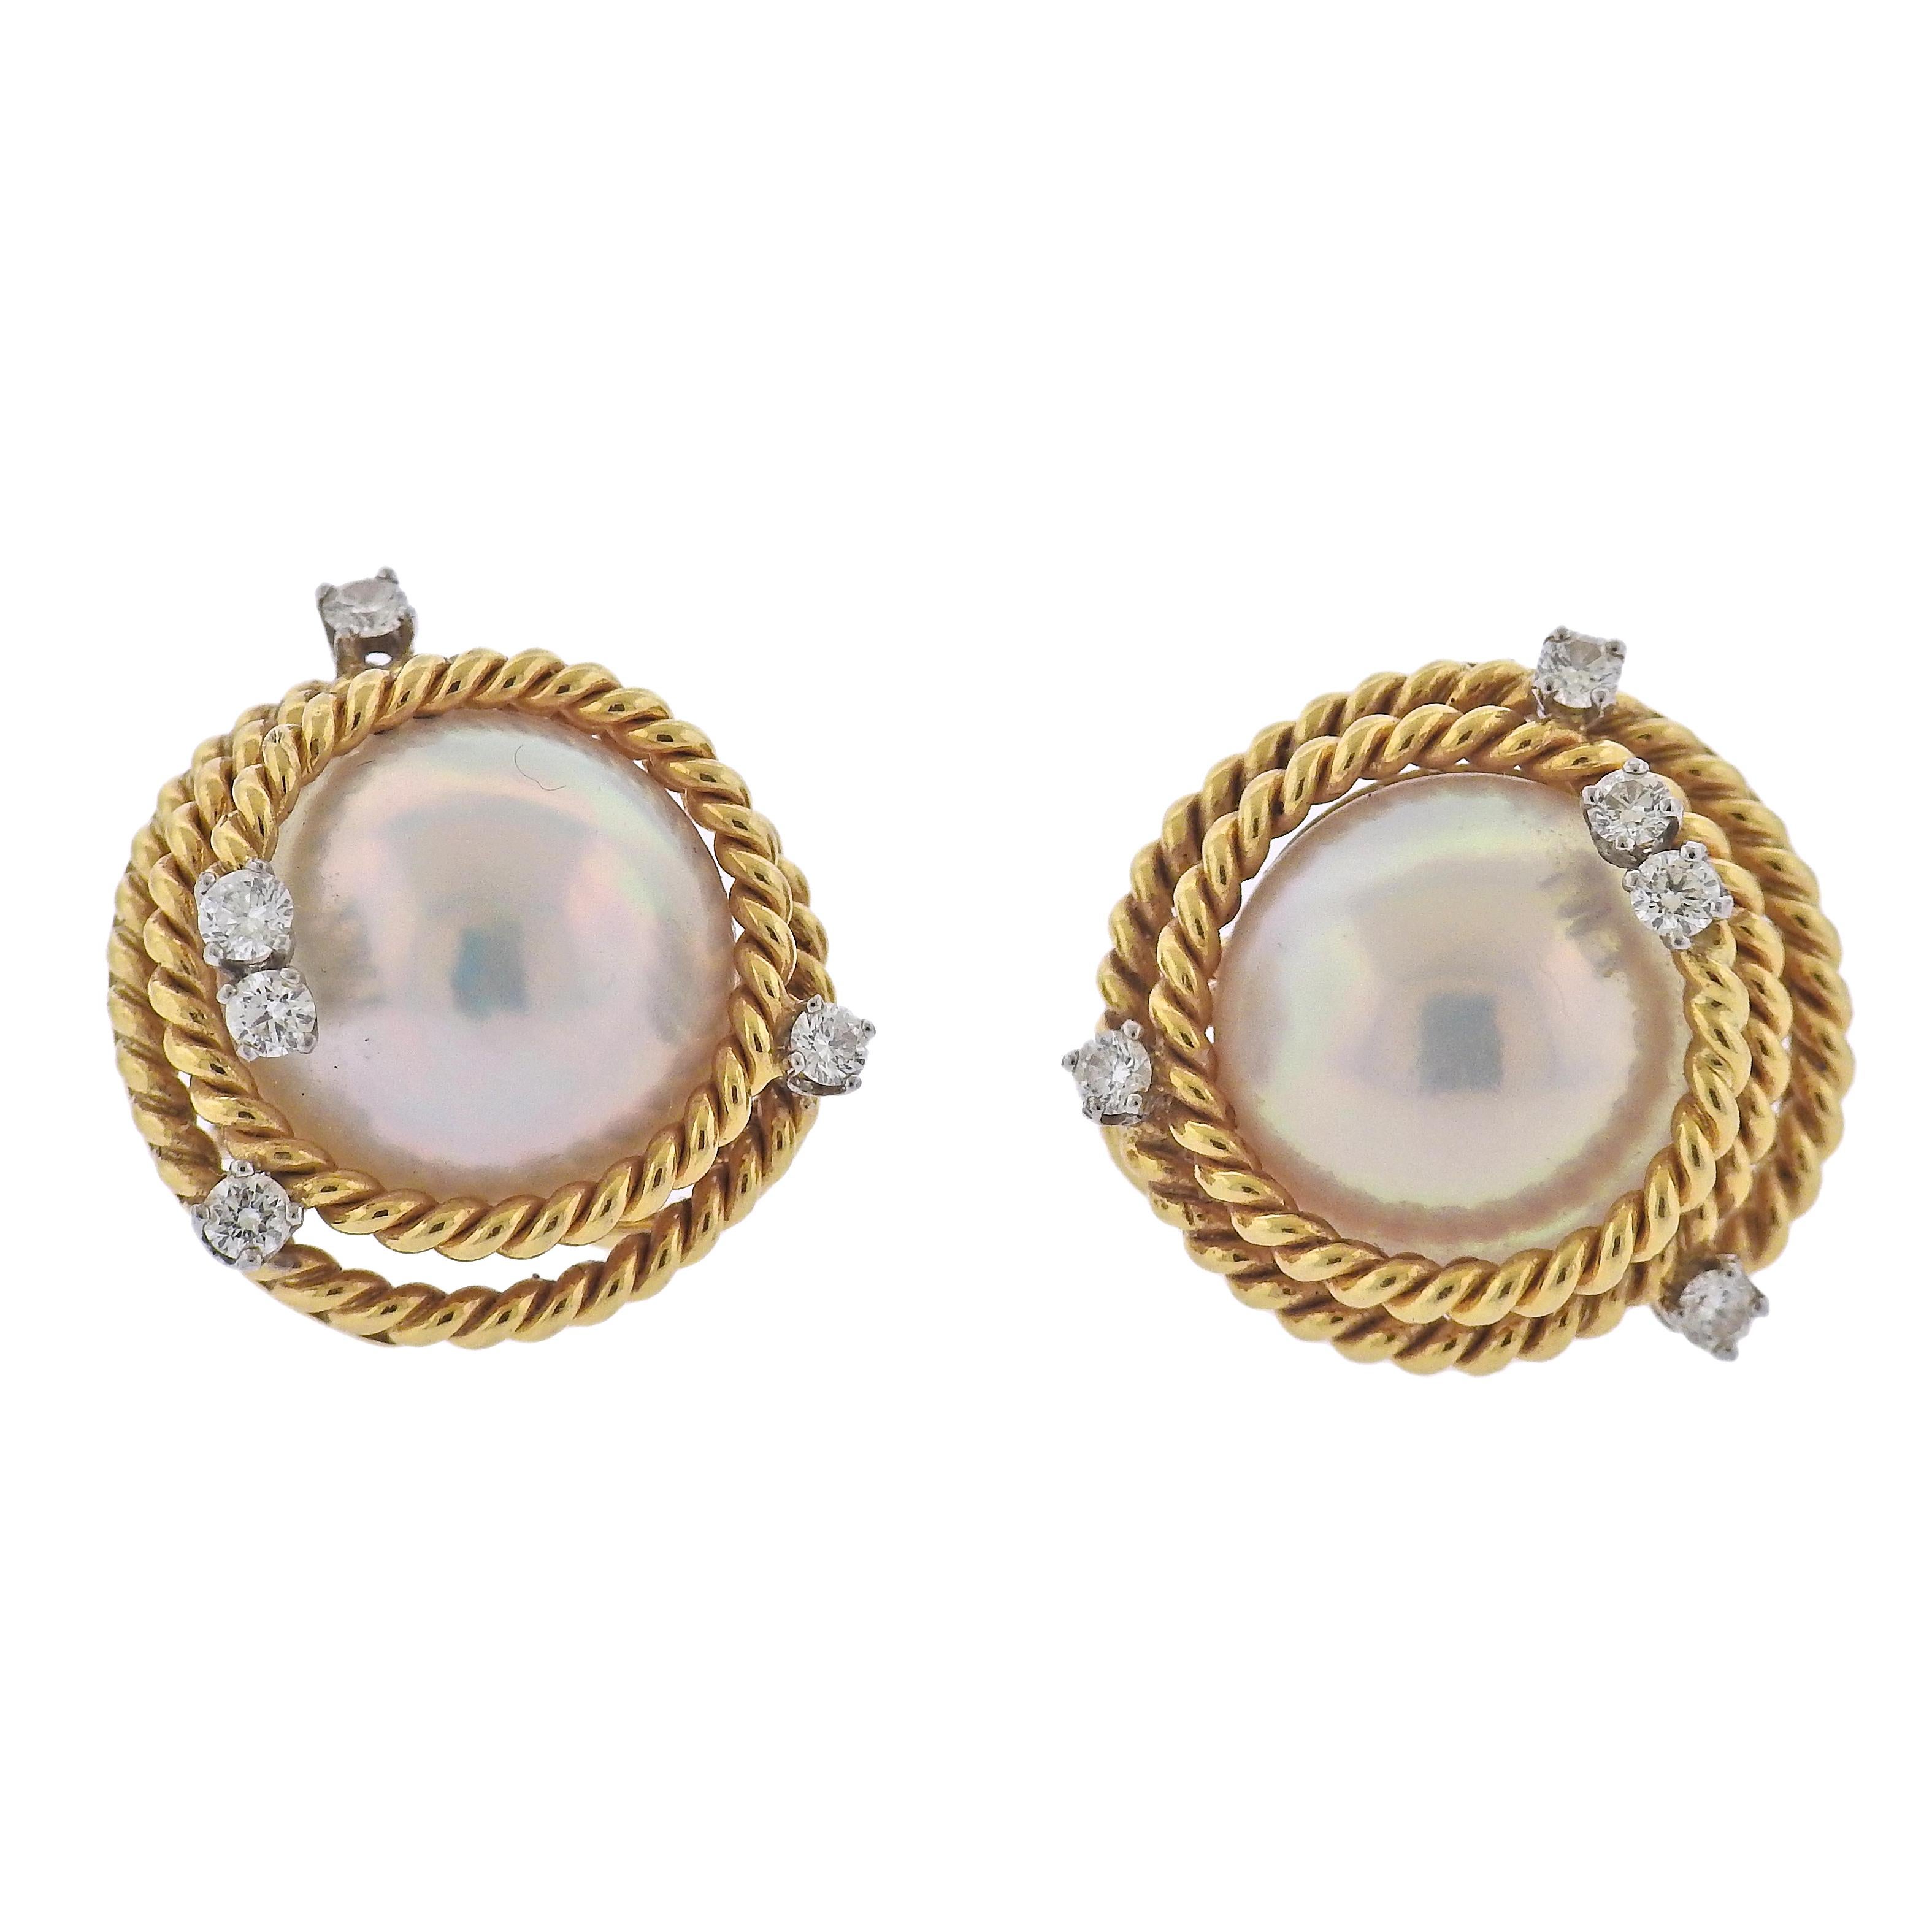 Pair of 18k gold and platinum rope earrings by Jean Schlumberger for Tiffany & Co, with 14.5mm pearls and approx. 0.55ctw in G/VS diamonds

MATERIAL: 18k Gold / Platinum
GEMSTONES: Diamond, Pearl
DIMENSIONS: Earrings are 21mm in diameter.
WEIGHT: